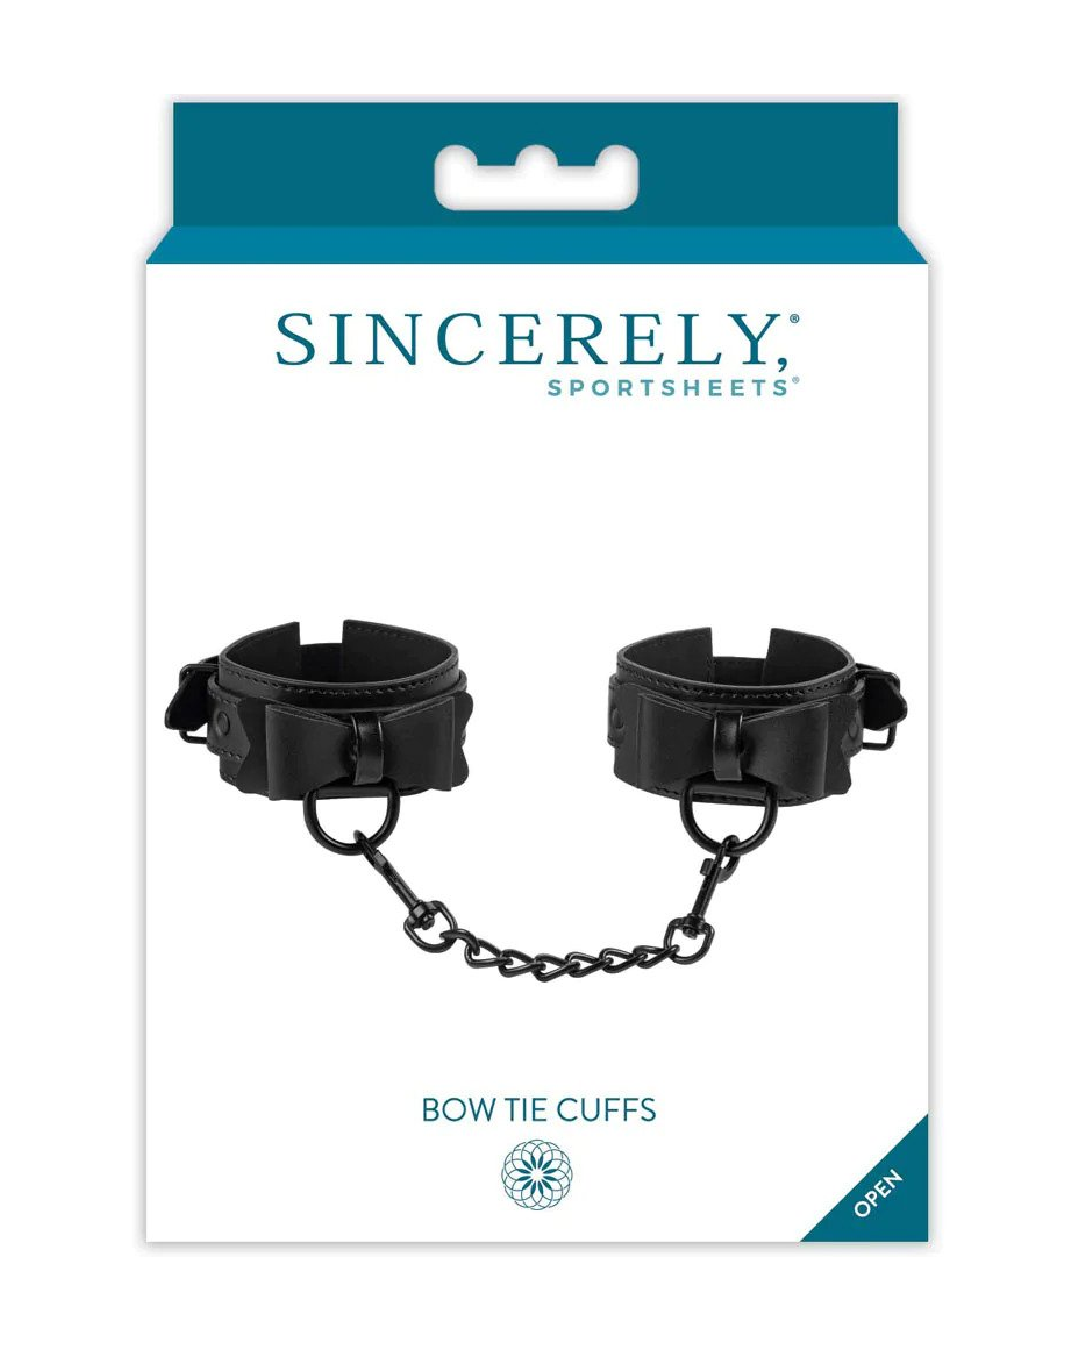 Sincerely Bow Tie Cuffs in box